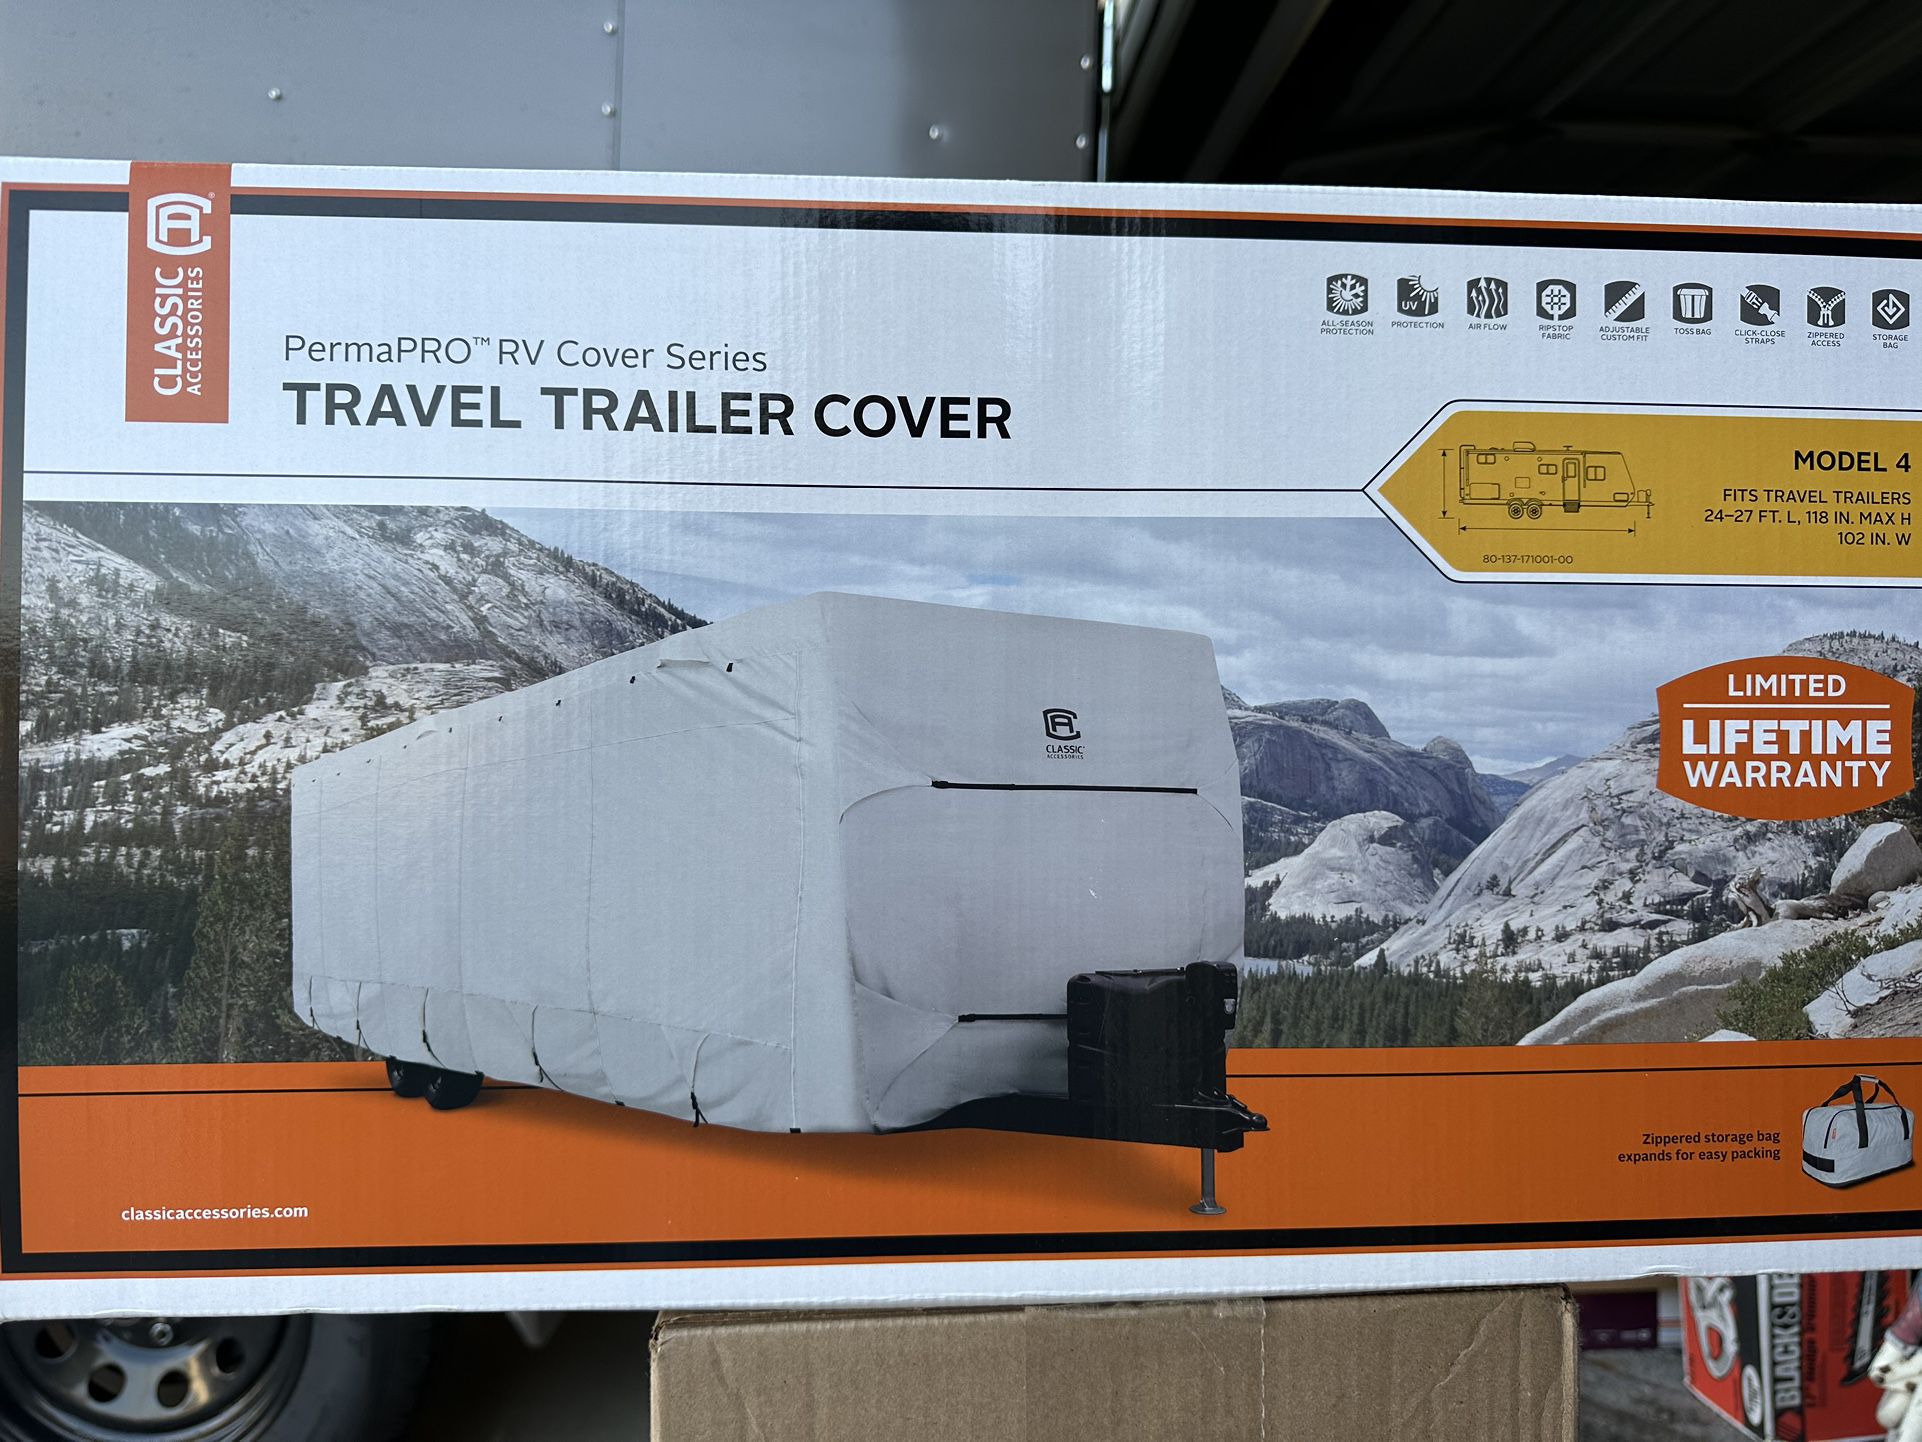 TRAVEL TRAILER COVER, MADE BY CLASSIC ACCESSORIES